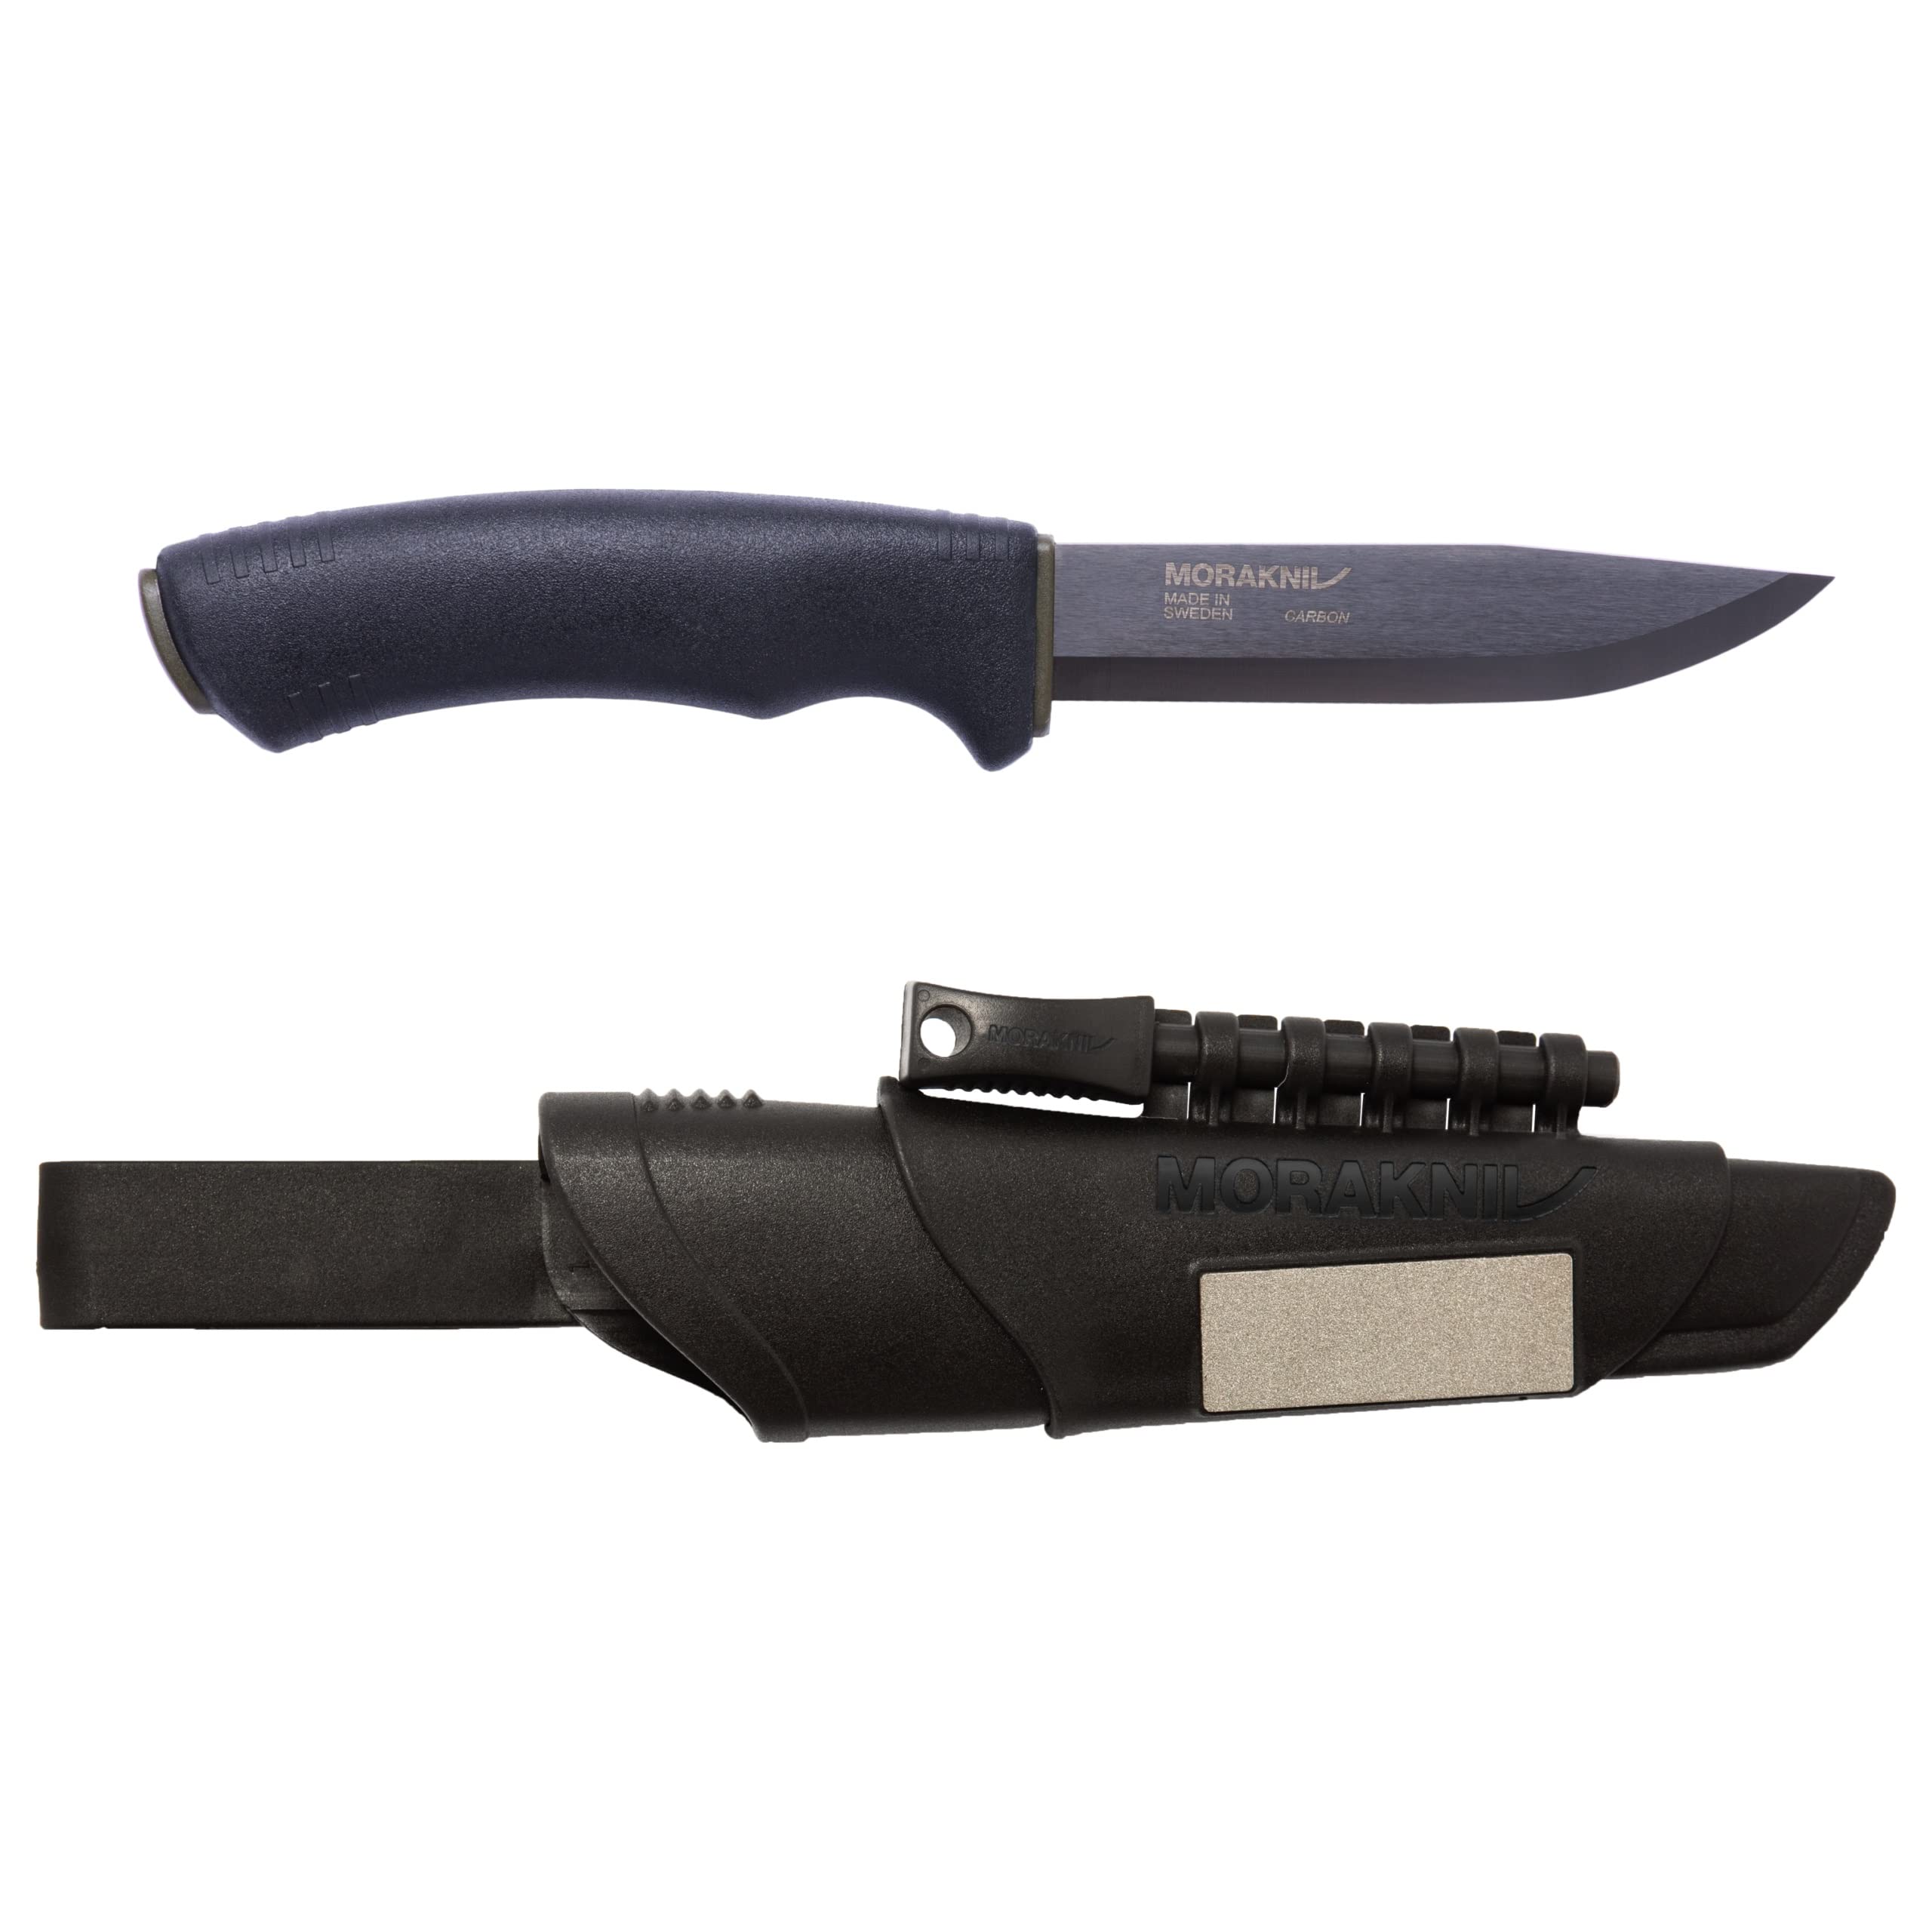 Book Cover Morakniv Carbon Steel Fixed-Blade Bushcraft Survival Knife with Sheath and Fire Starter, Black, 4.3 Inch